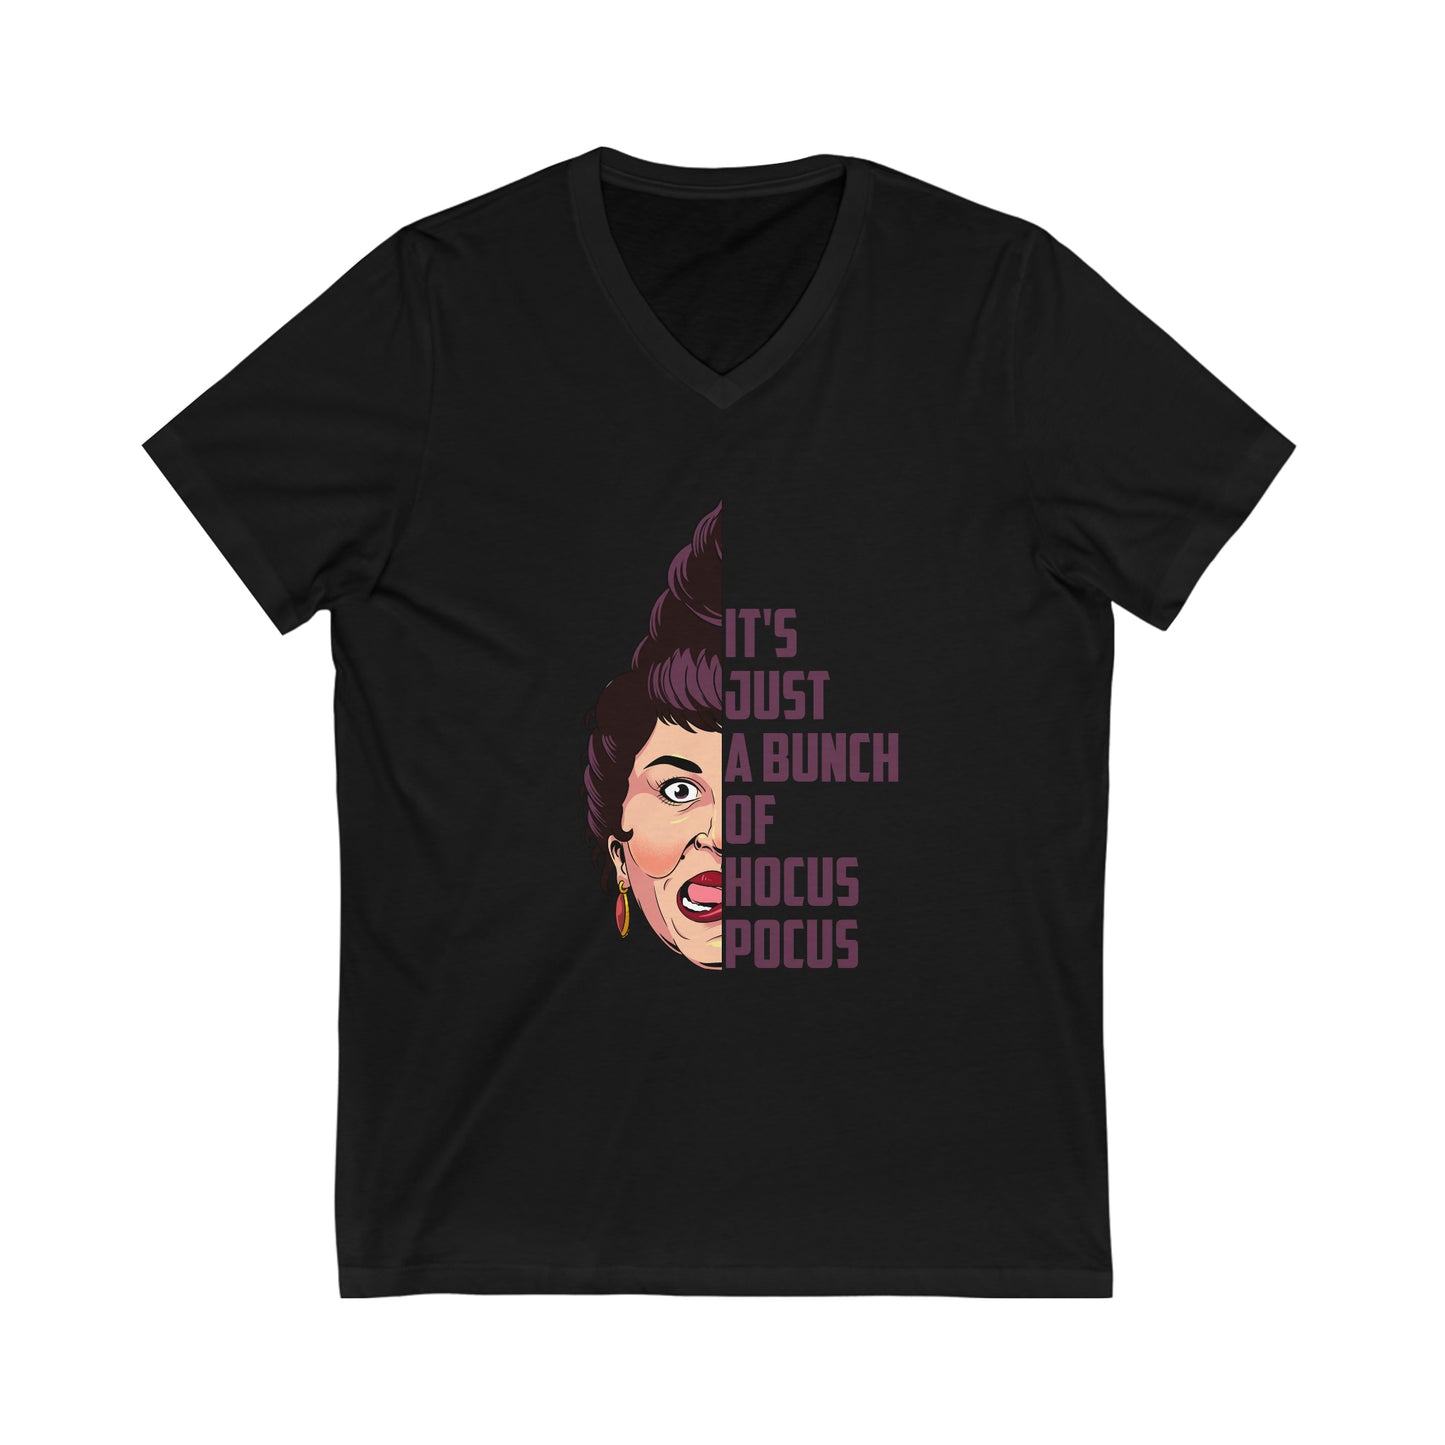 It's Just a Bunch of Hocus Pocus Adult Unisex V-Neck Tee